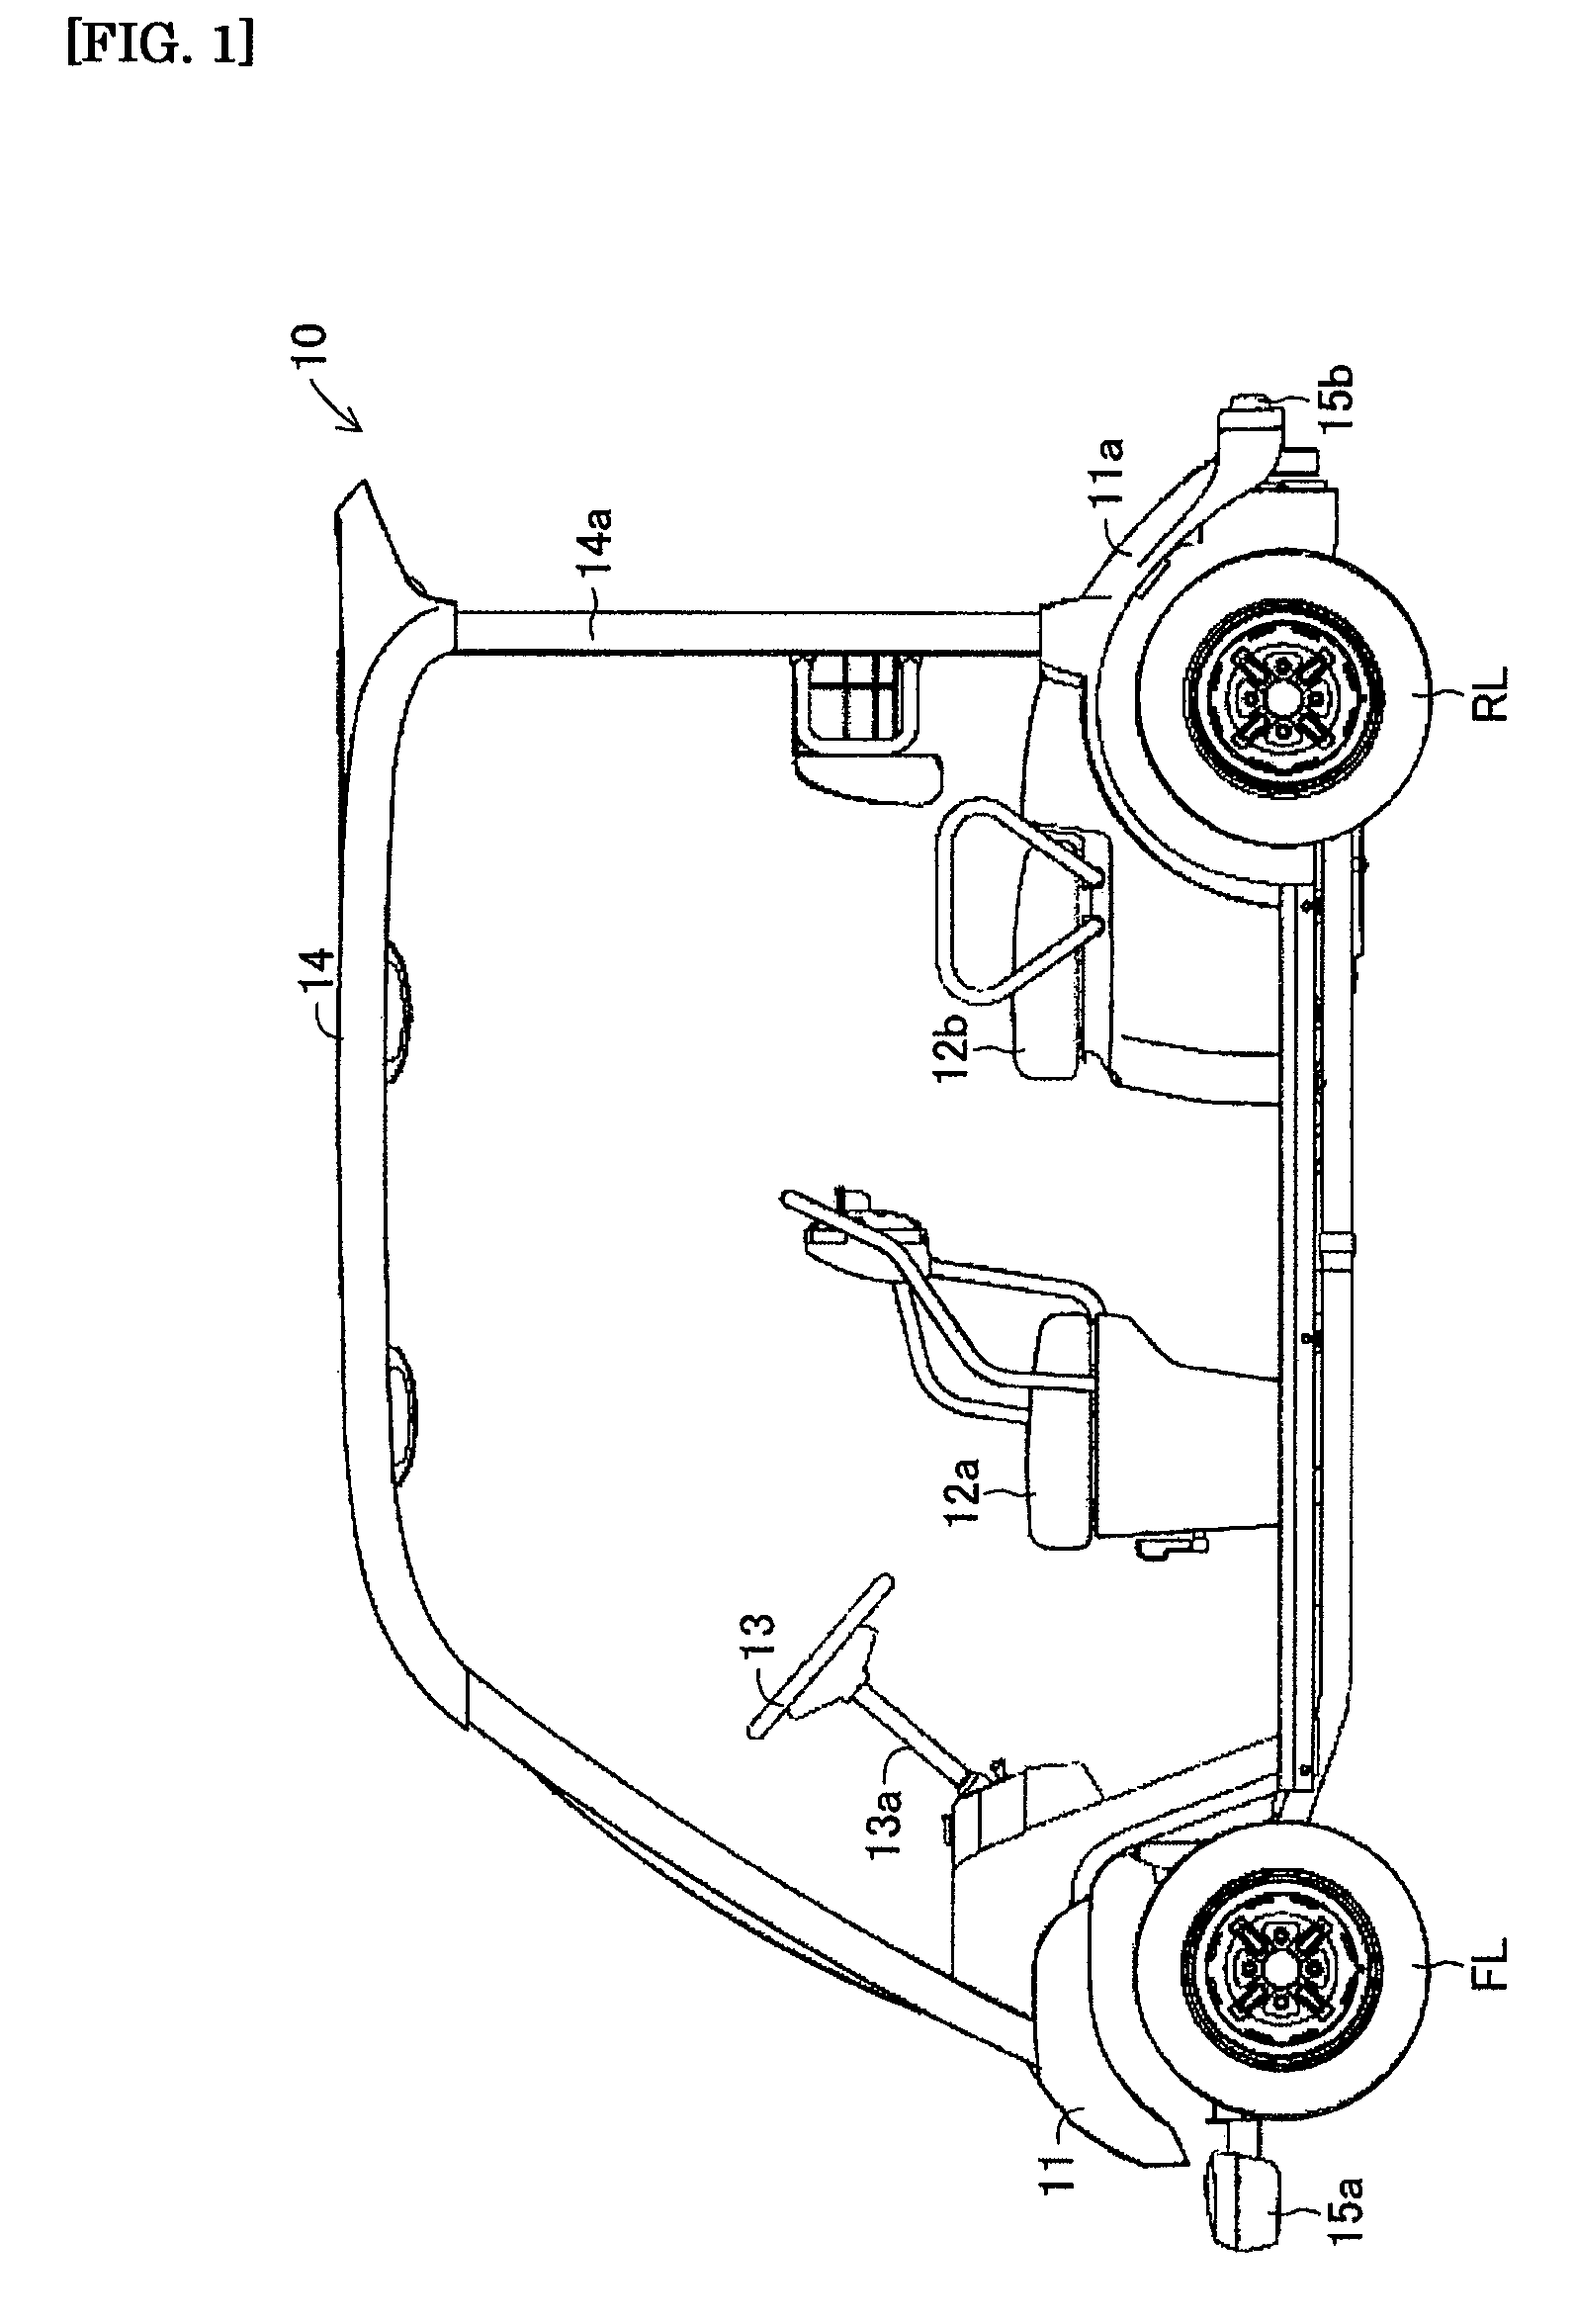 Charge control device for executing a plurality of charge stages